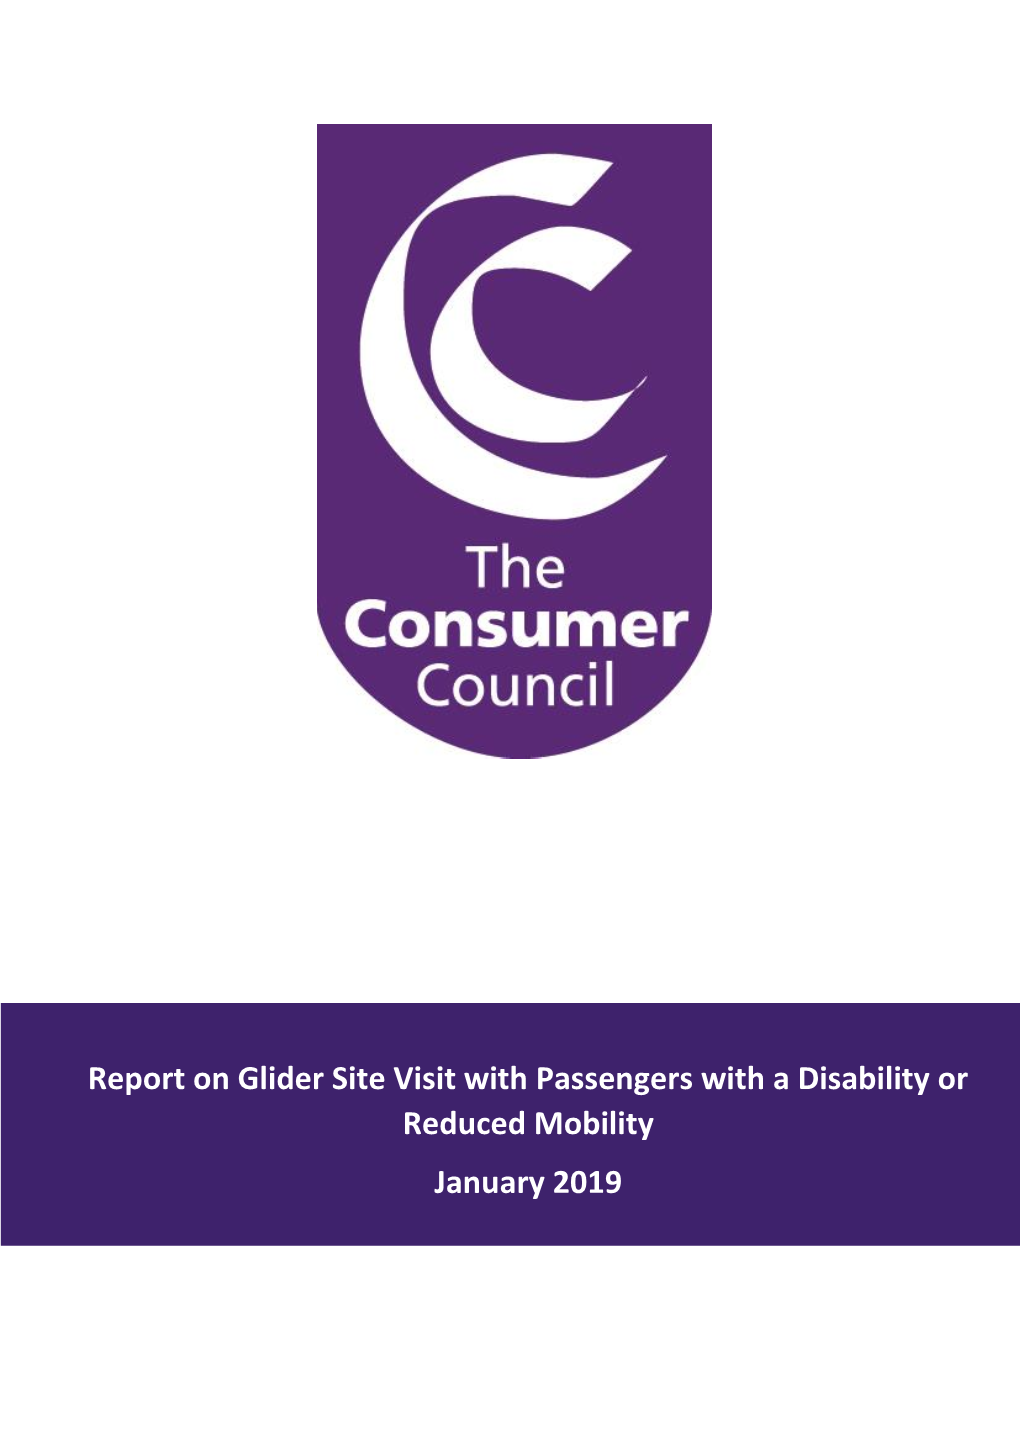 Report on Glider Site Visit with Passengers with a Disability Or Reduced Mobility January 2019